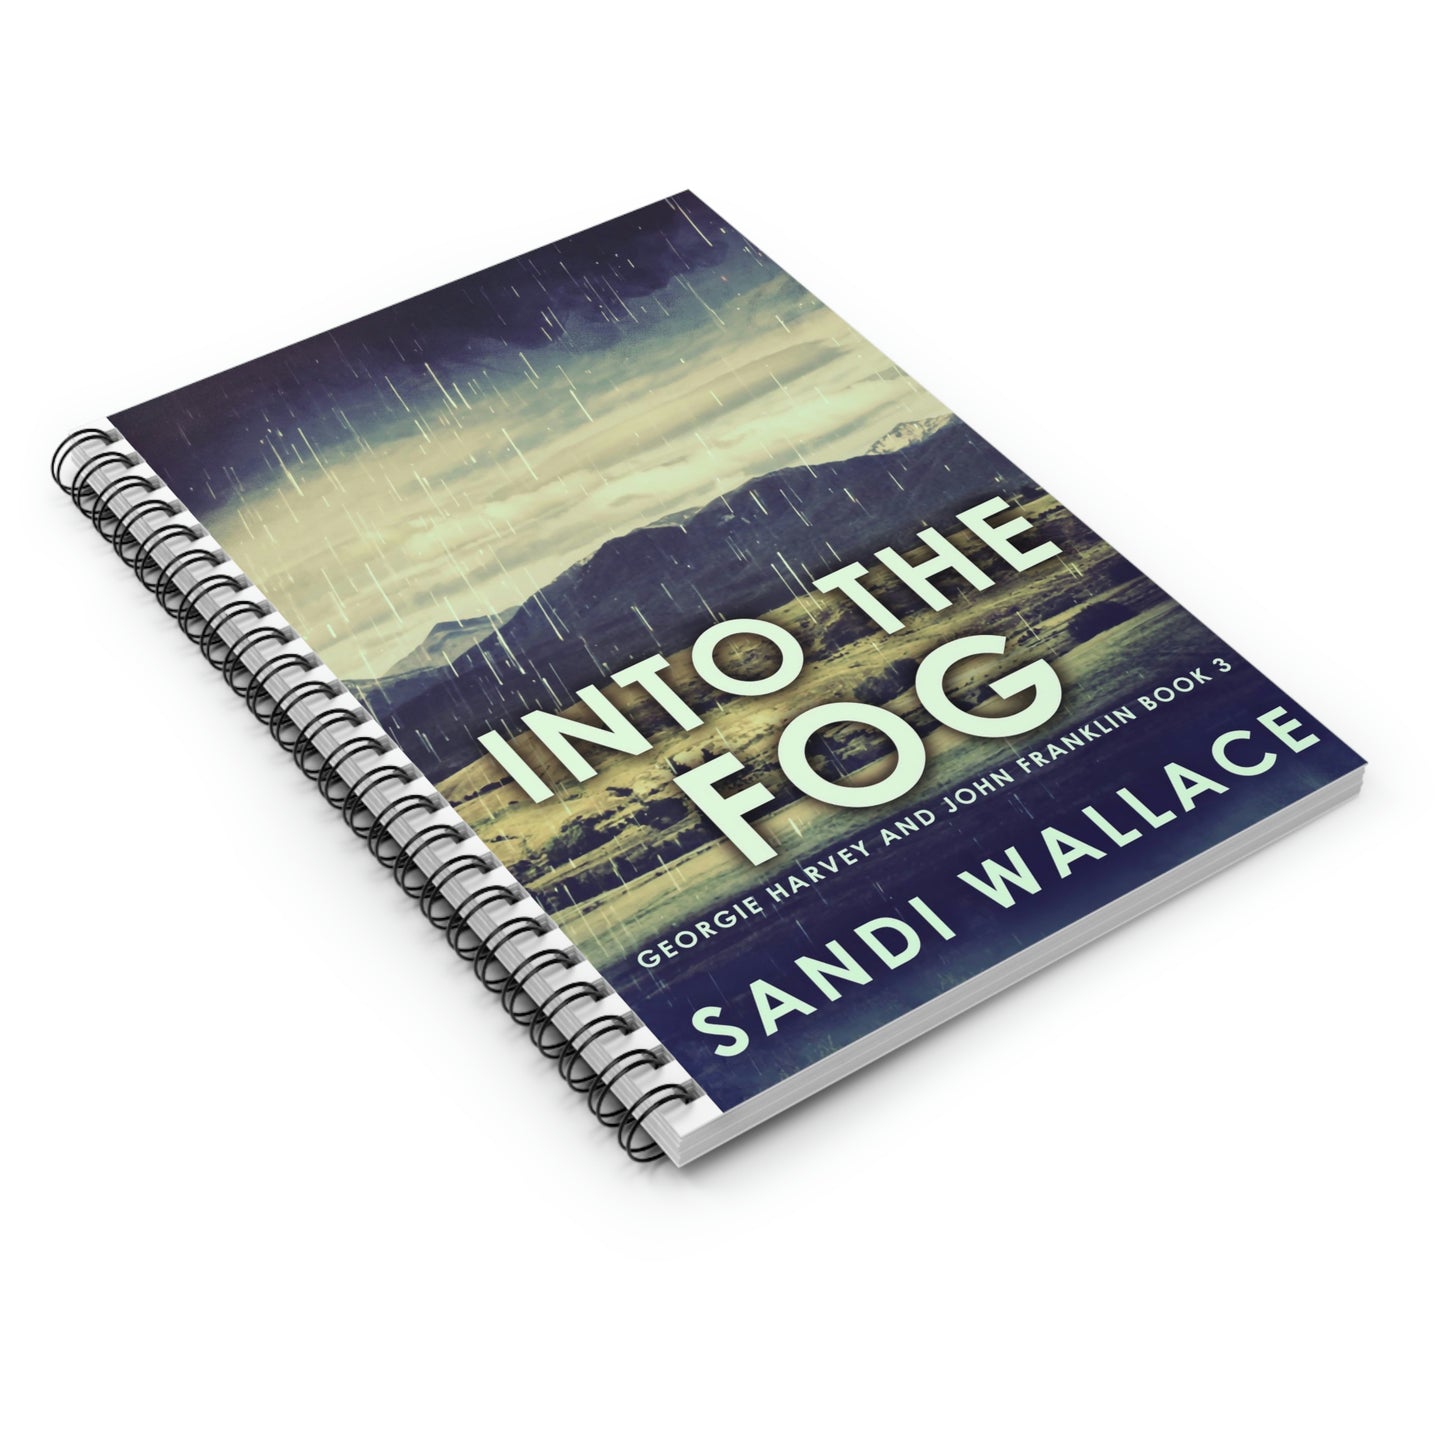 Into The Fog - Spiral Notebook